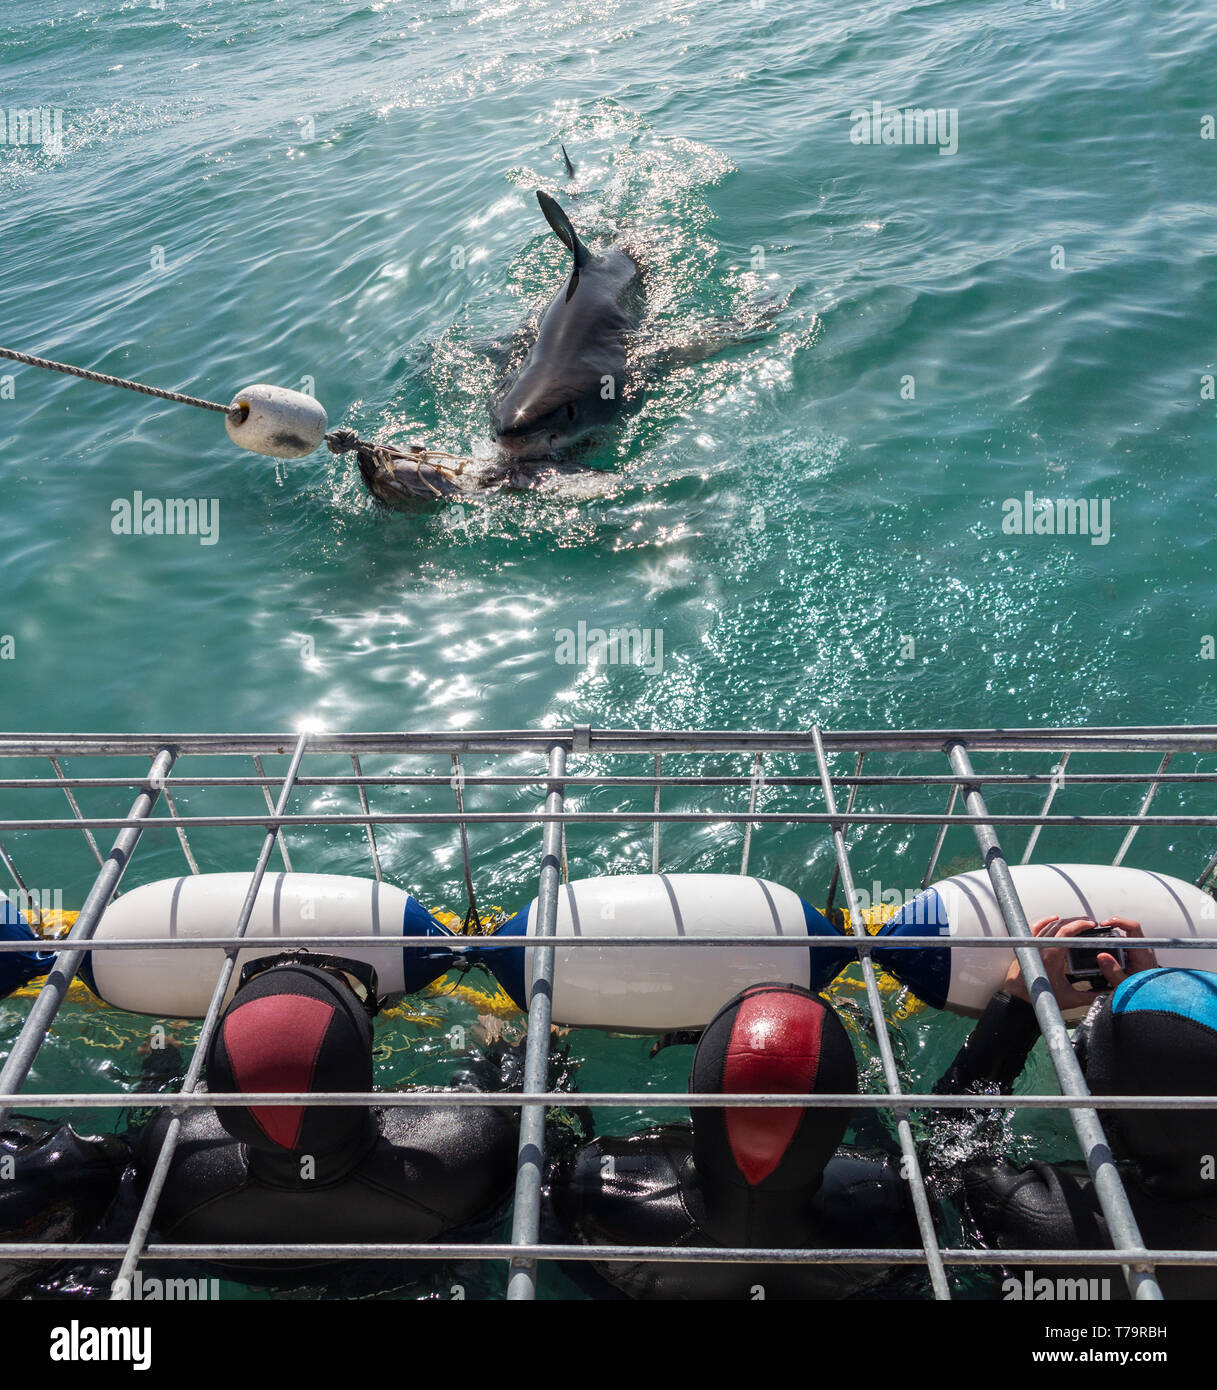 Divers in diving cages in Gaansbaai in South Africa with a great white shark approaching the cage in tourist adventure Stock Photo